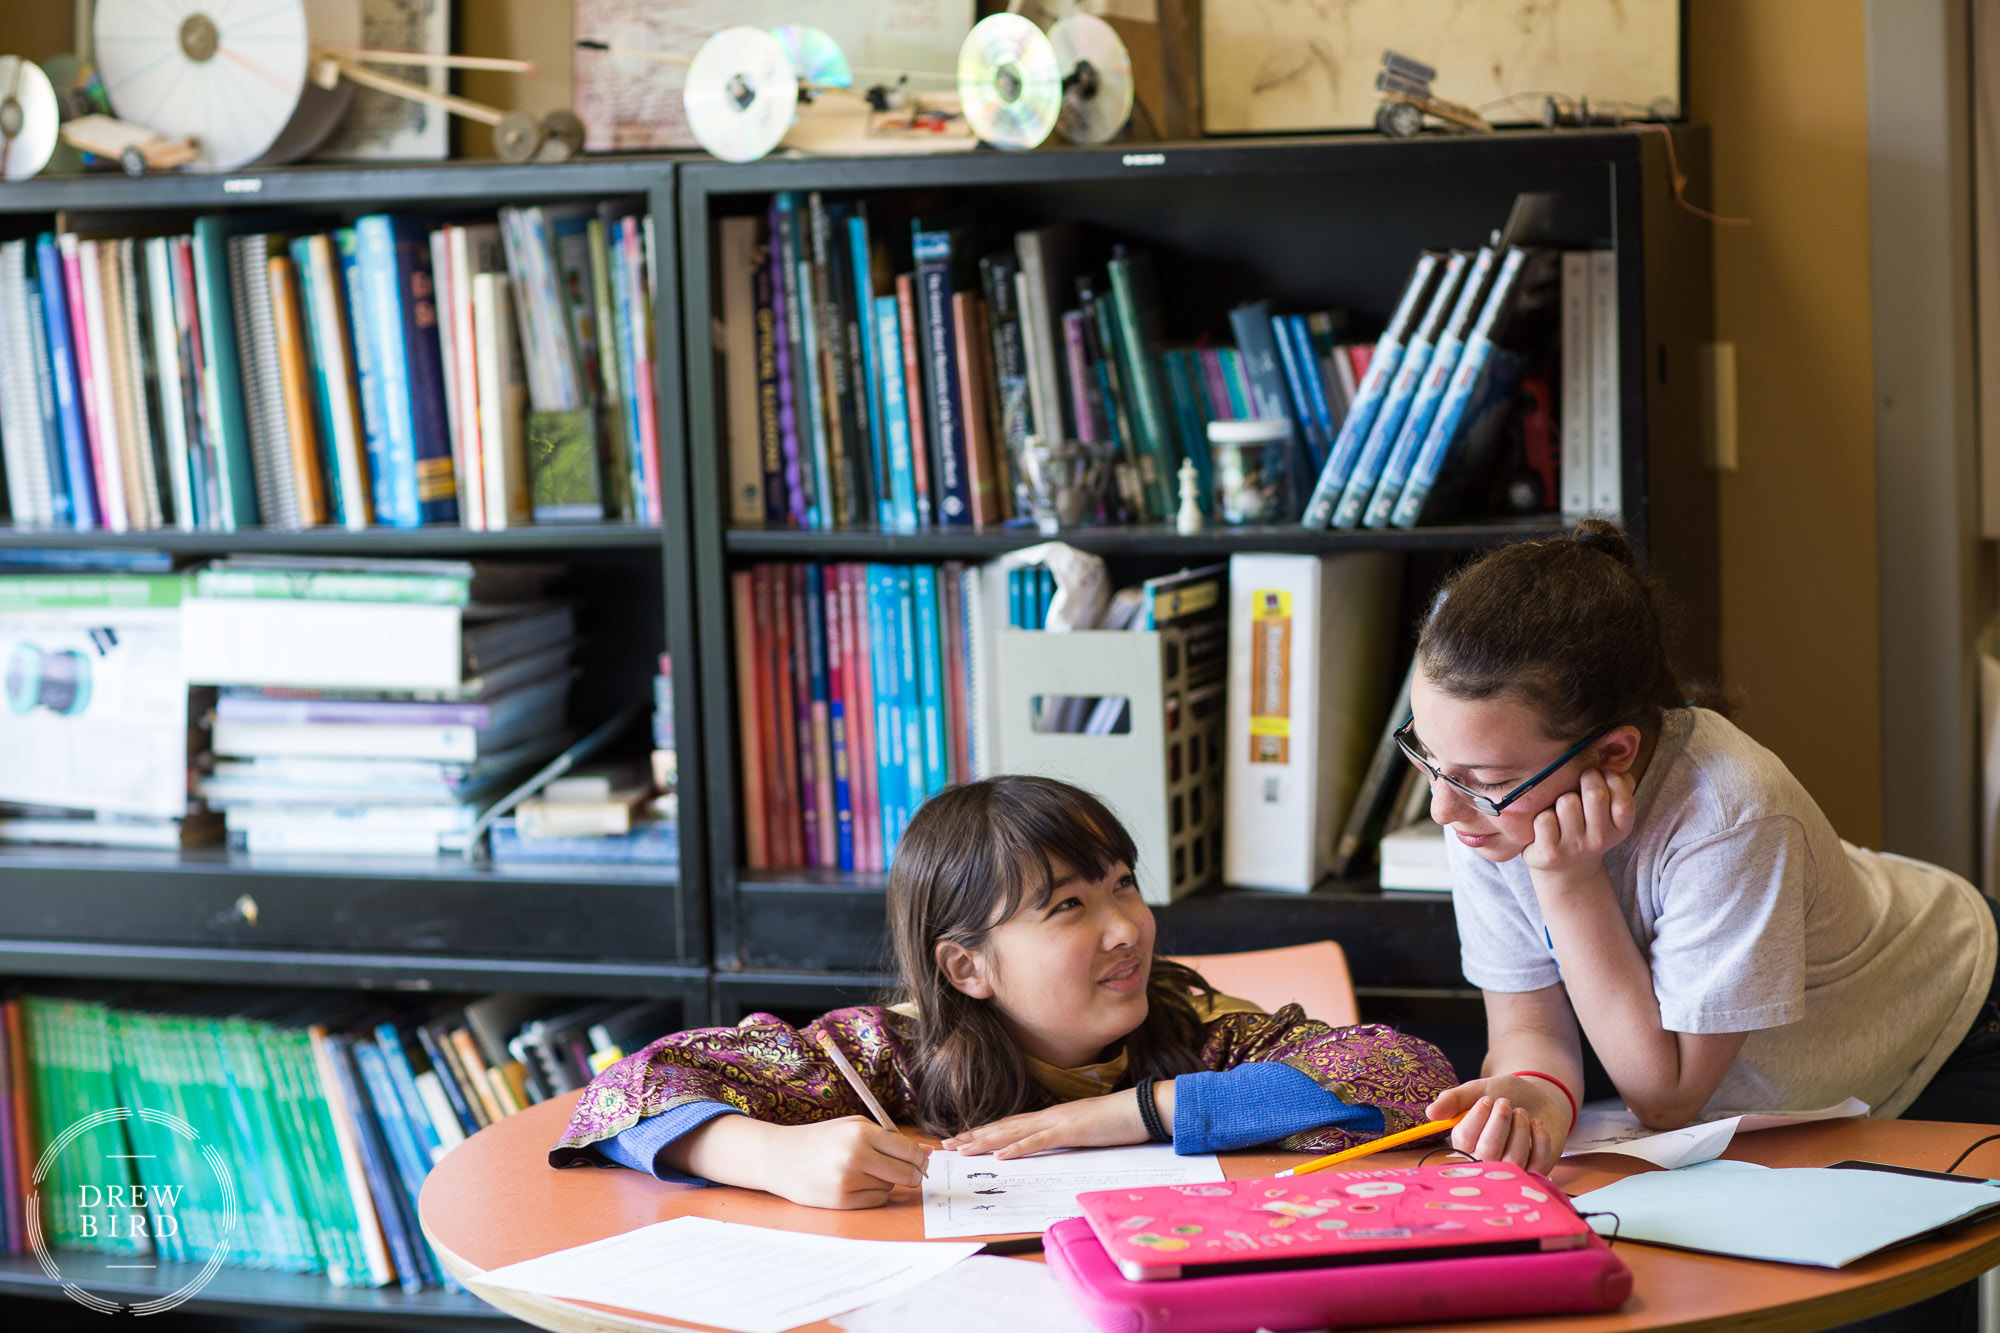 Two grade school students working together in the classroom at Poughkeepsie Day School in New York. San Francisco independent school photographer and private school education lifestyle photography by Drew Bird.